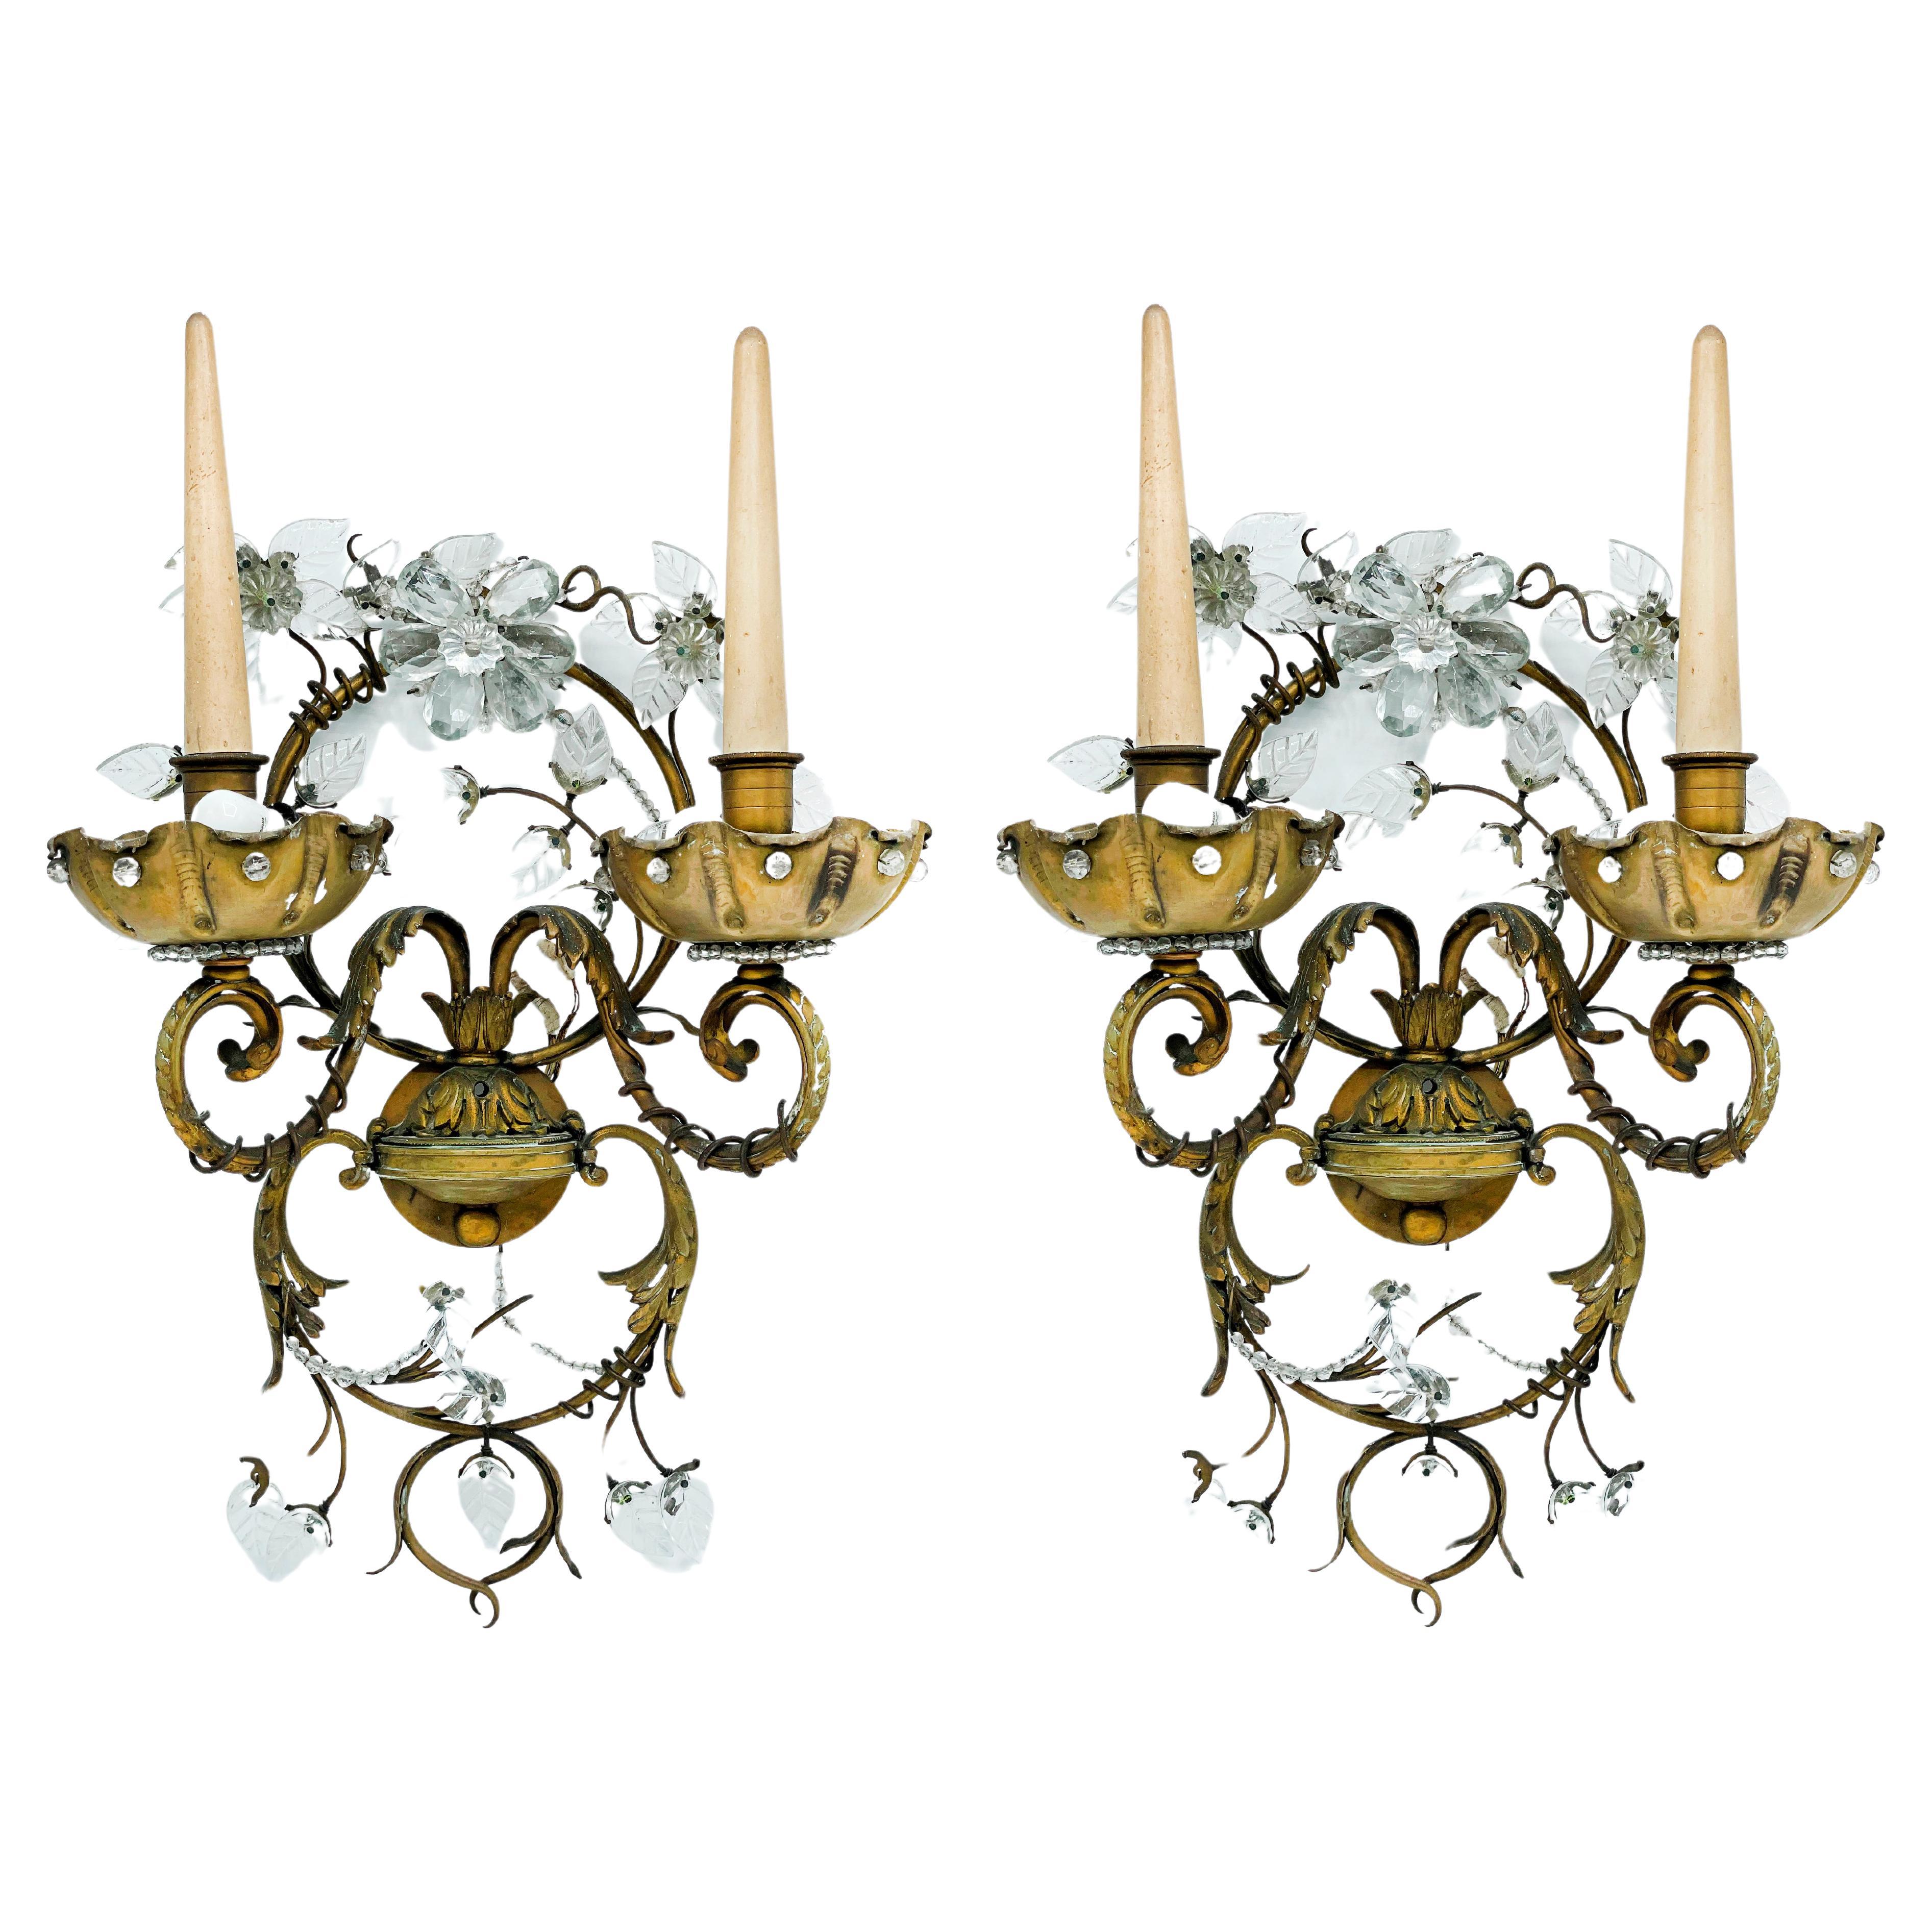 Pair of Fine French Modern Neoclassical Wall Lights Sconces by Maison Baguès.